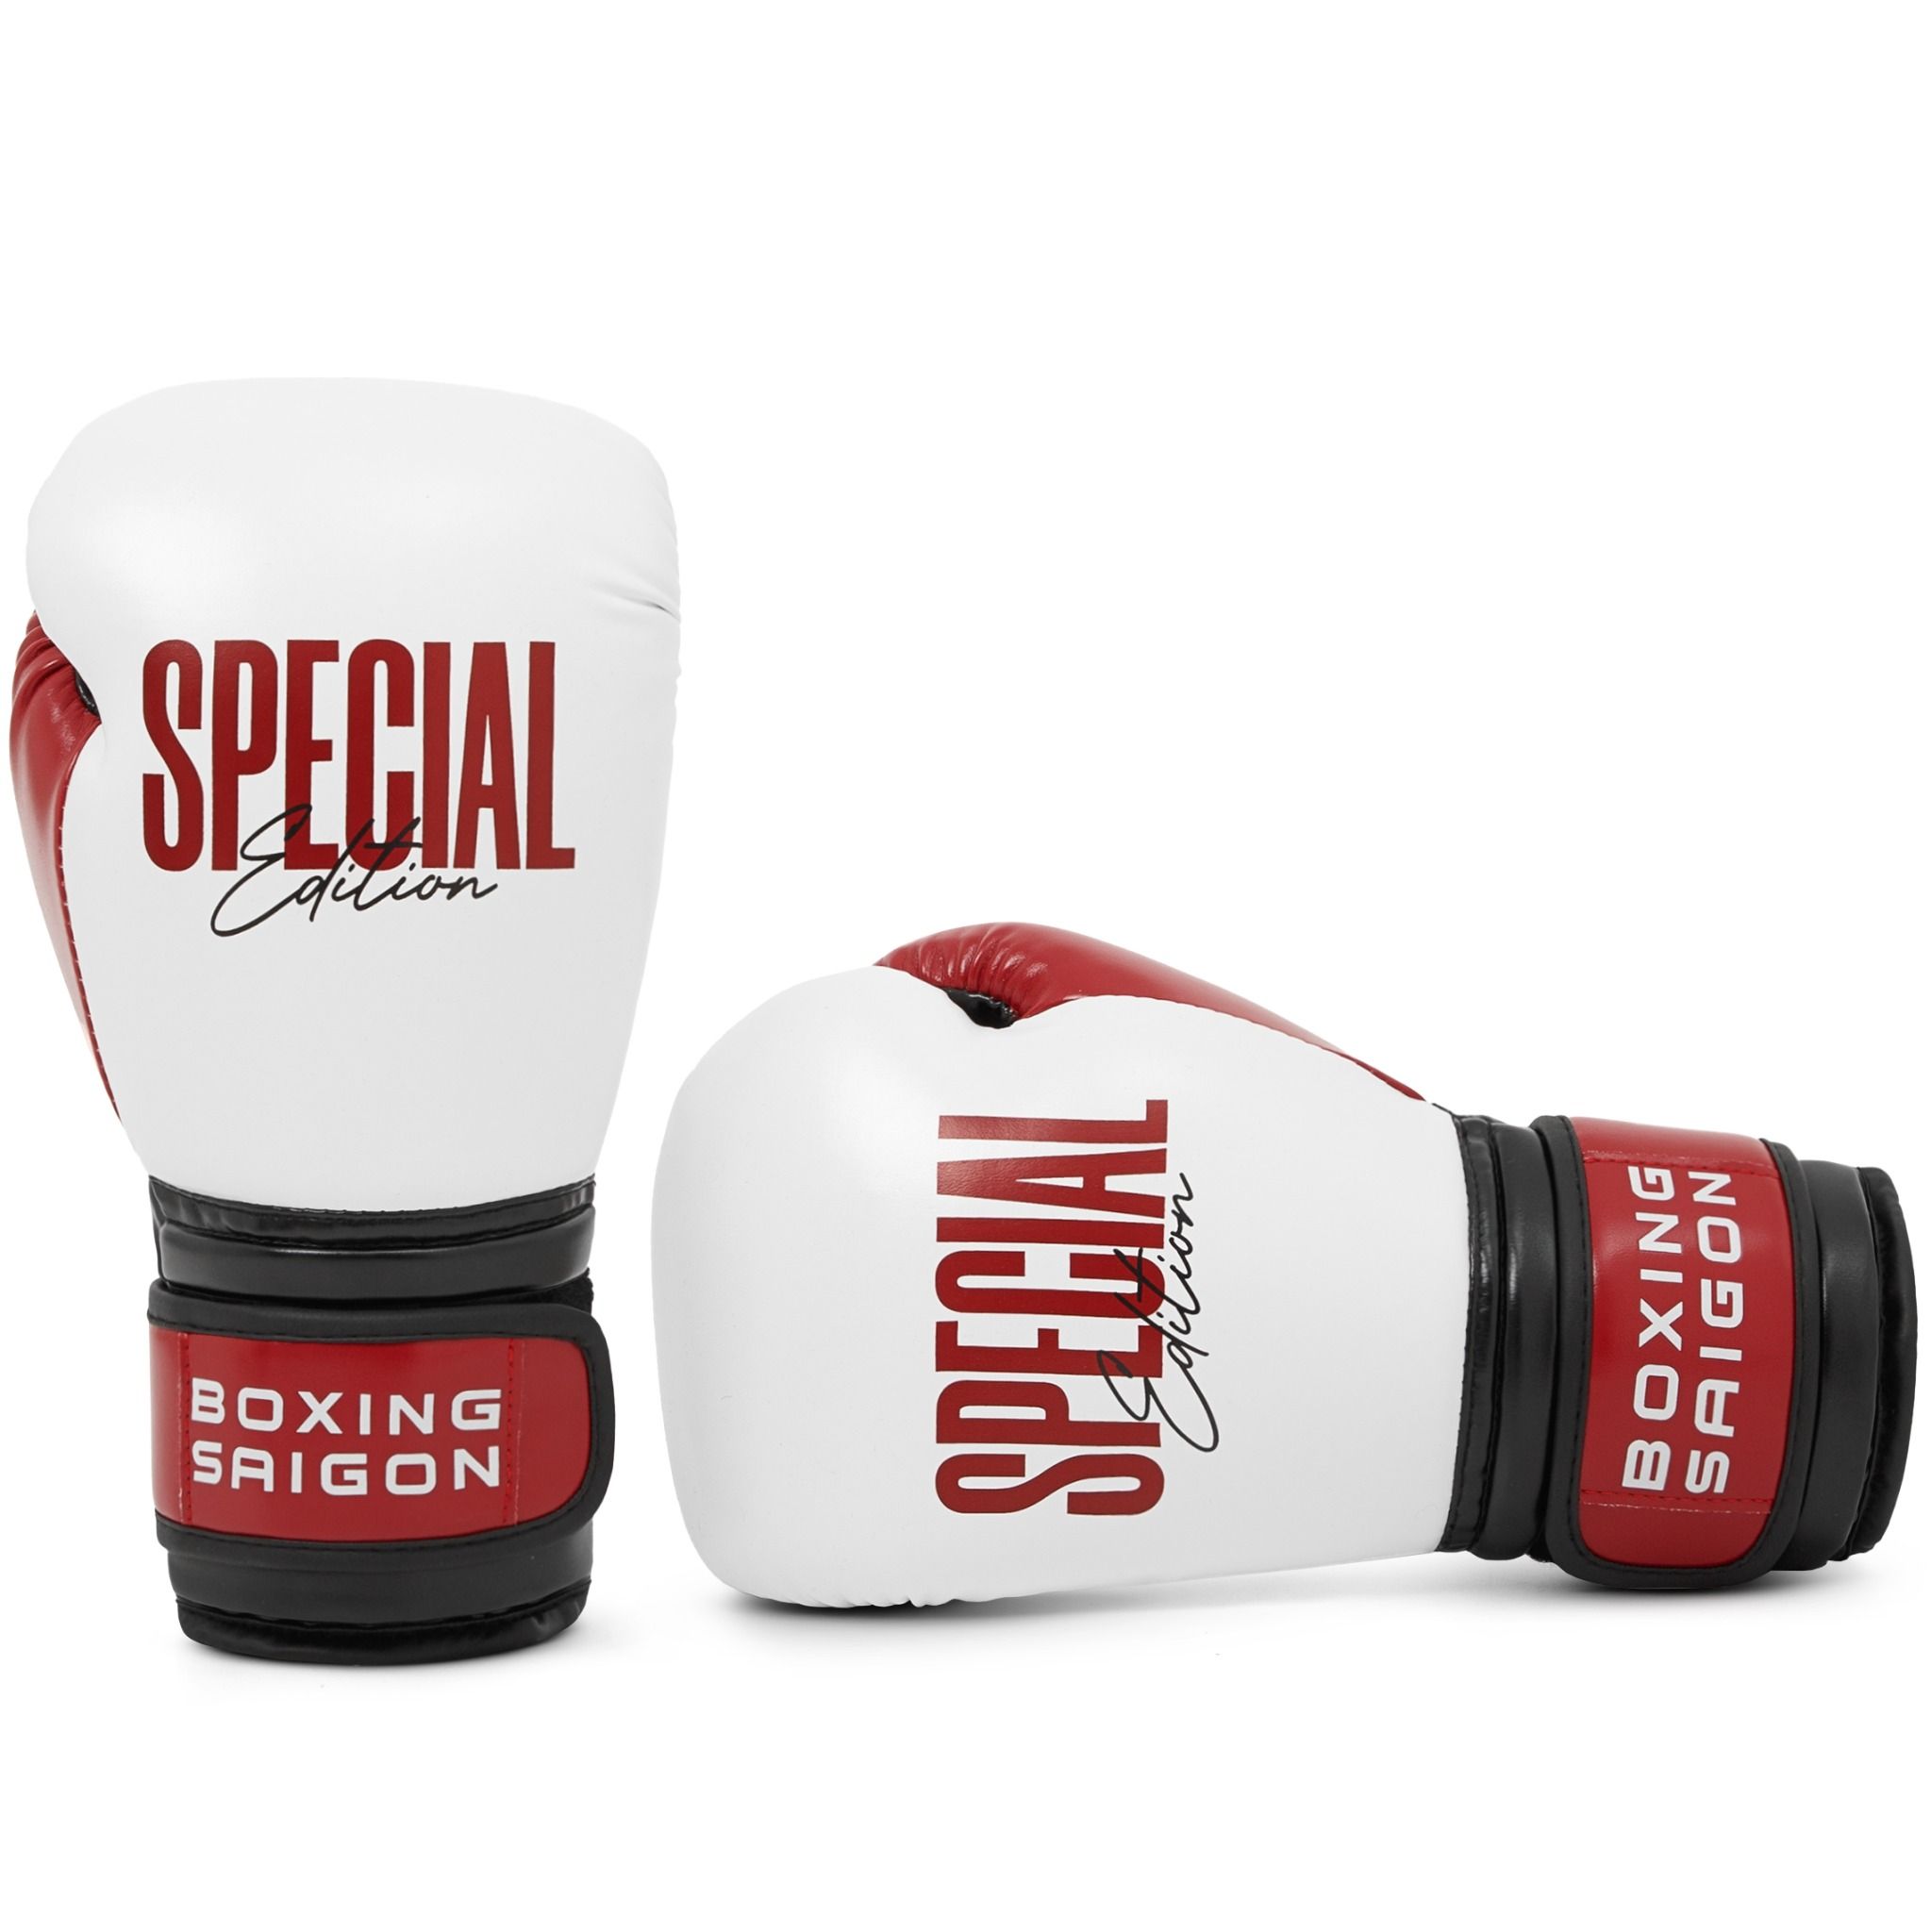 Găng Tay Boxing Saigon Special Edition Gloves - Signature